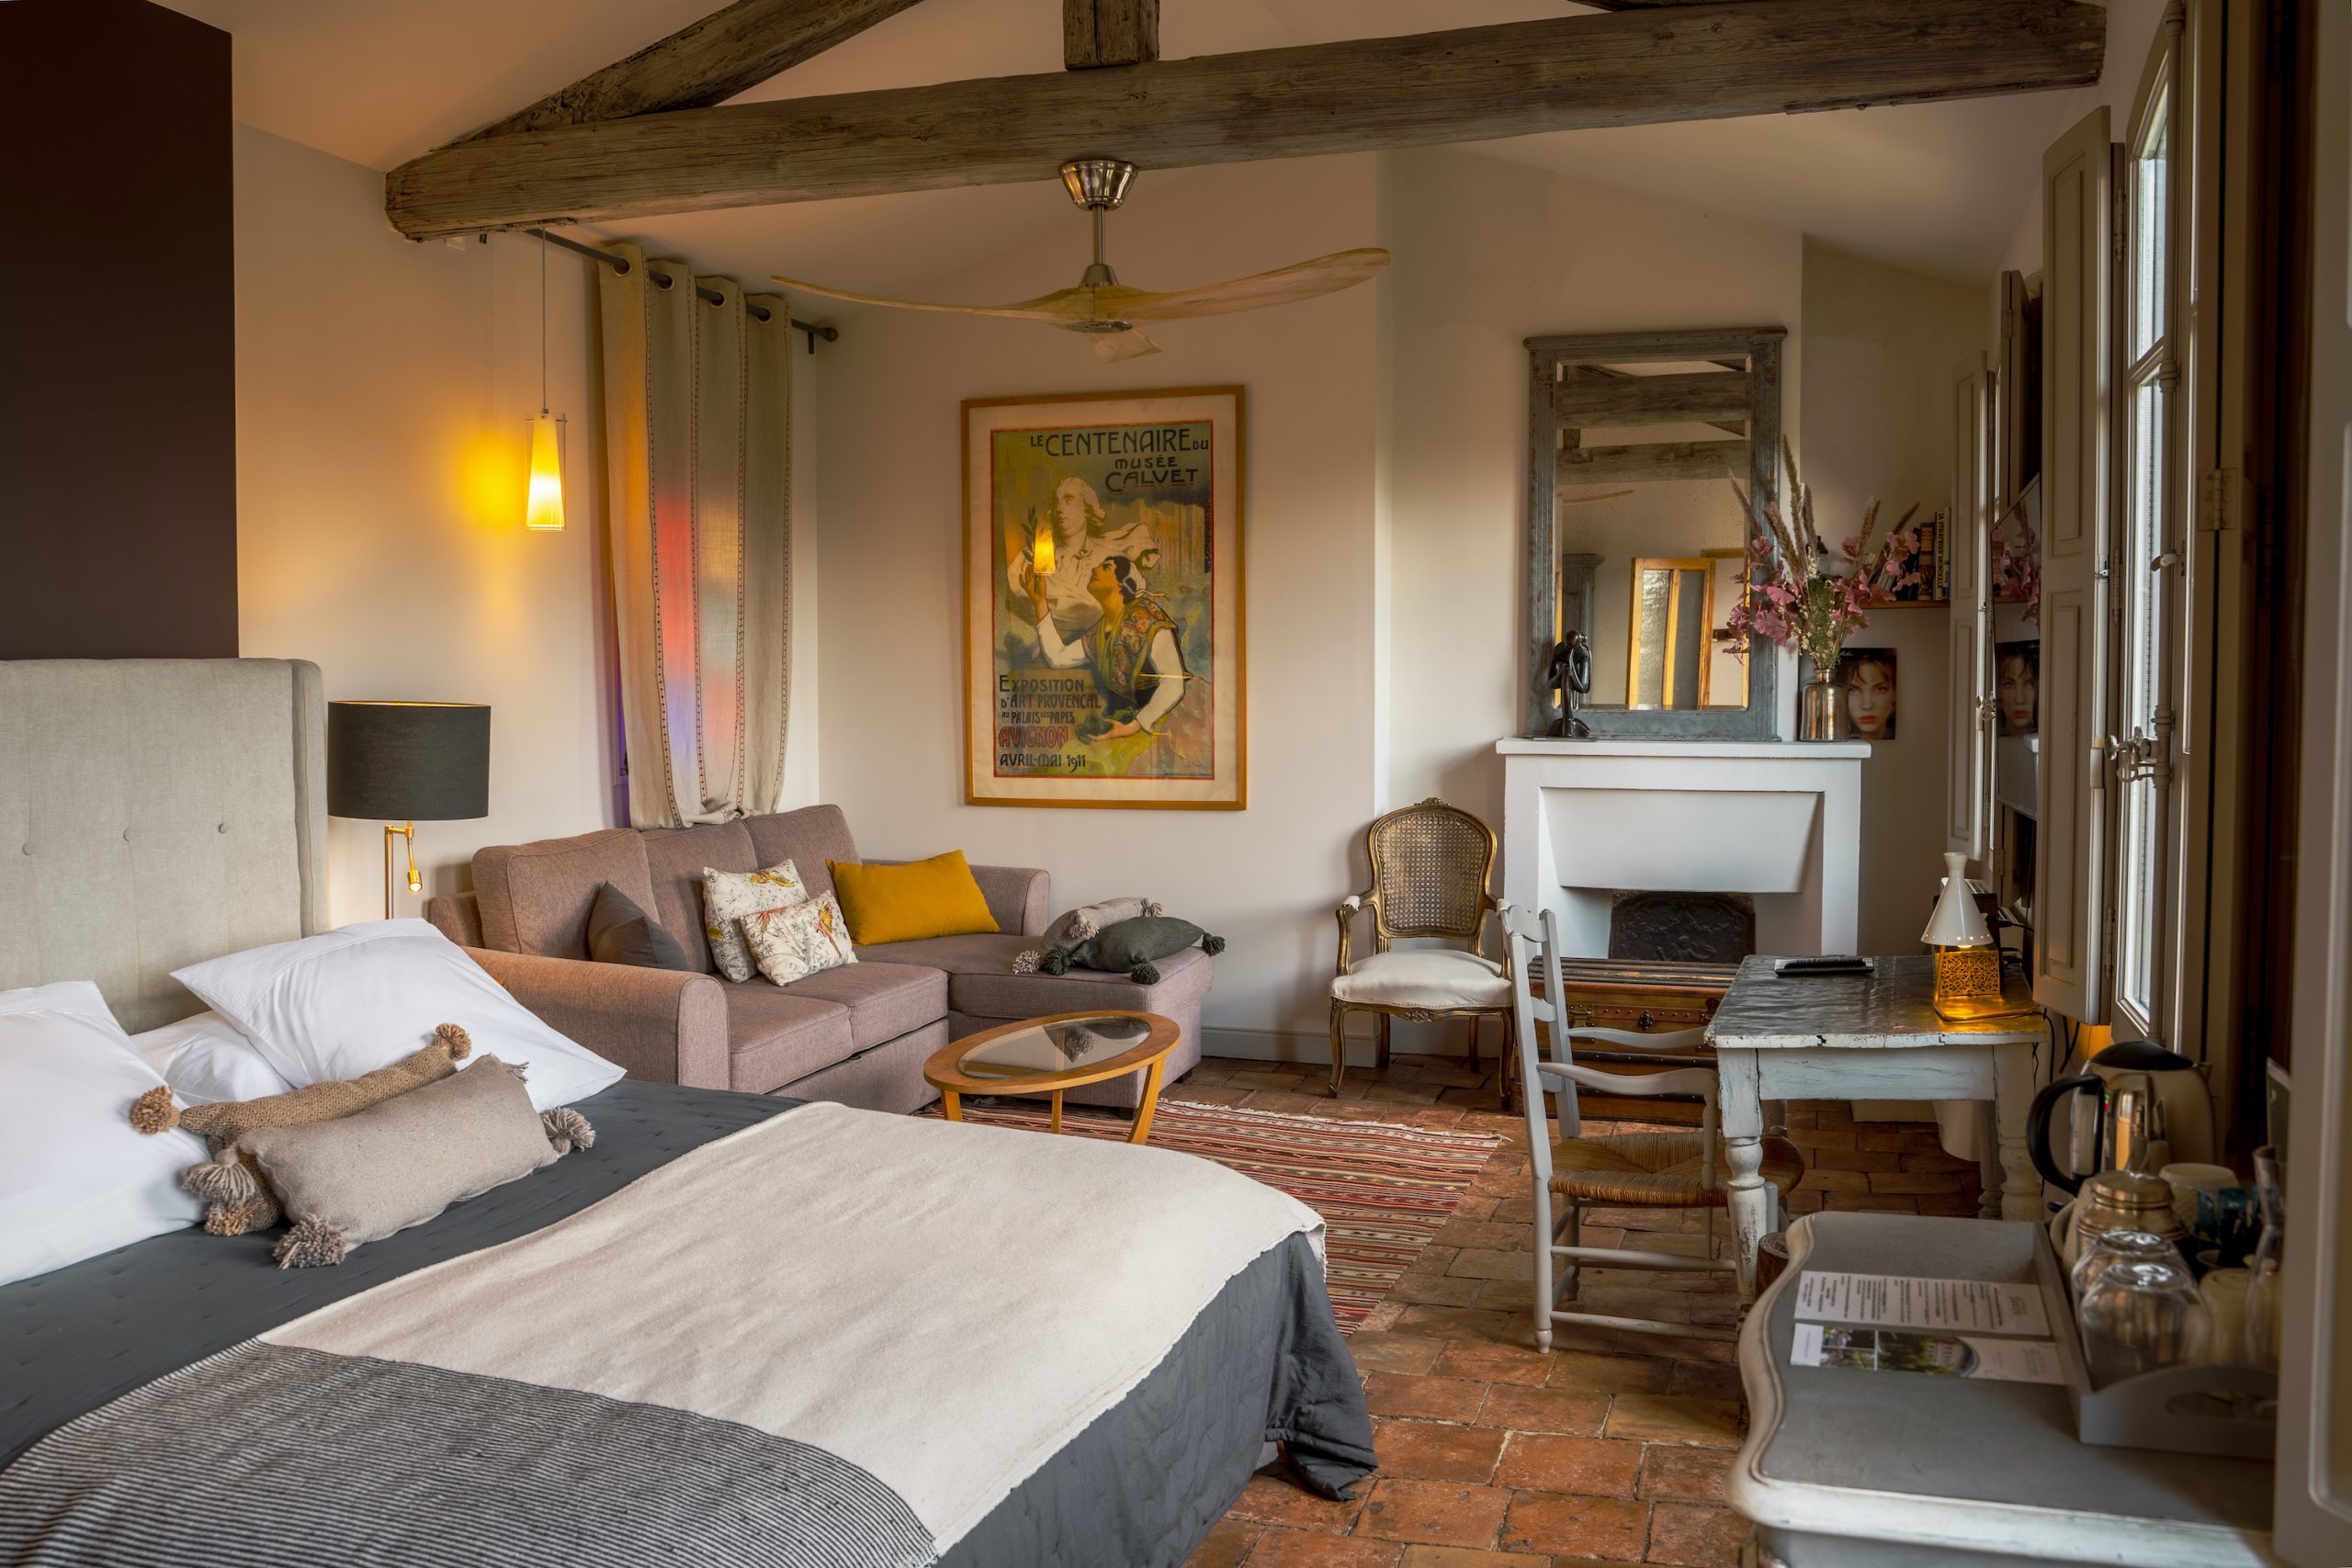 Les Jardins de Babylone with a high ceiling, old beams and authentic floors